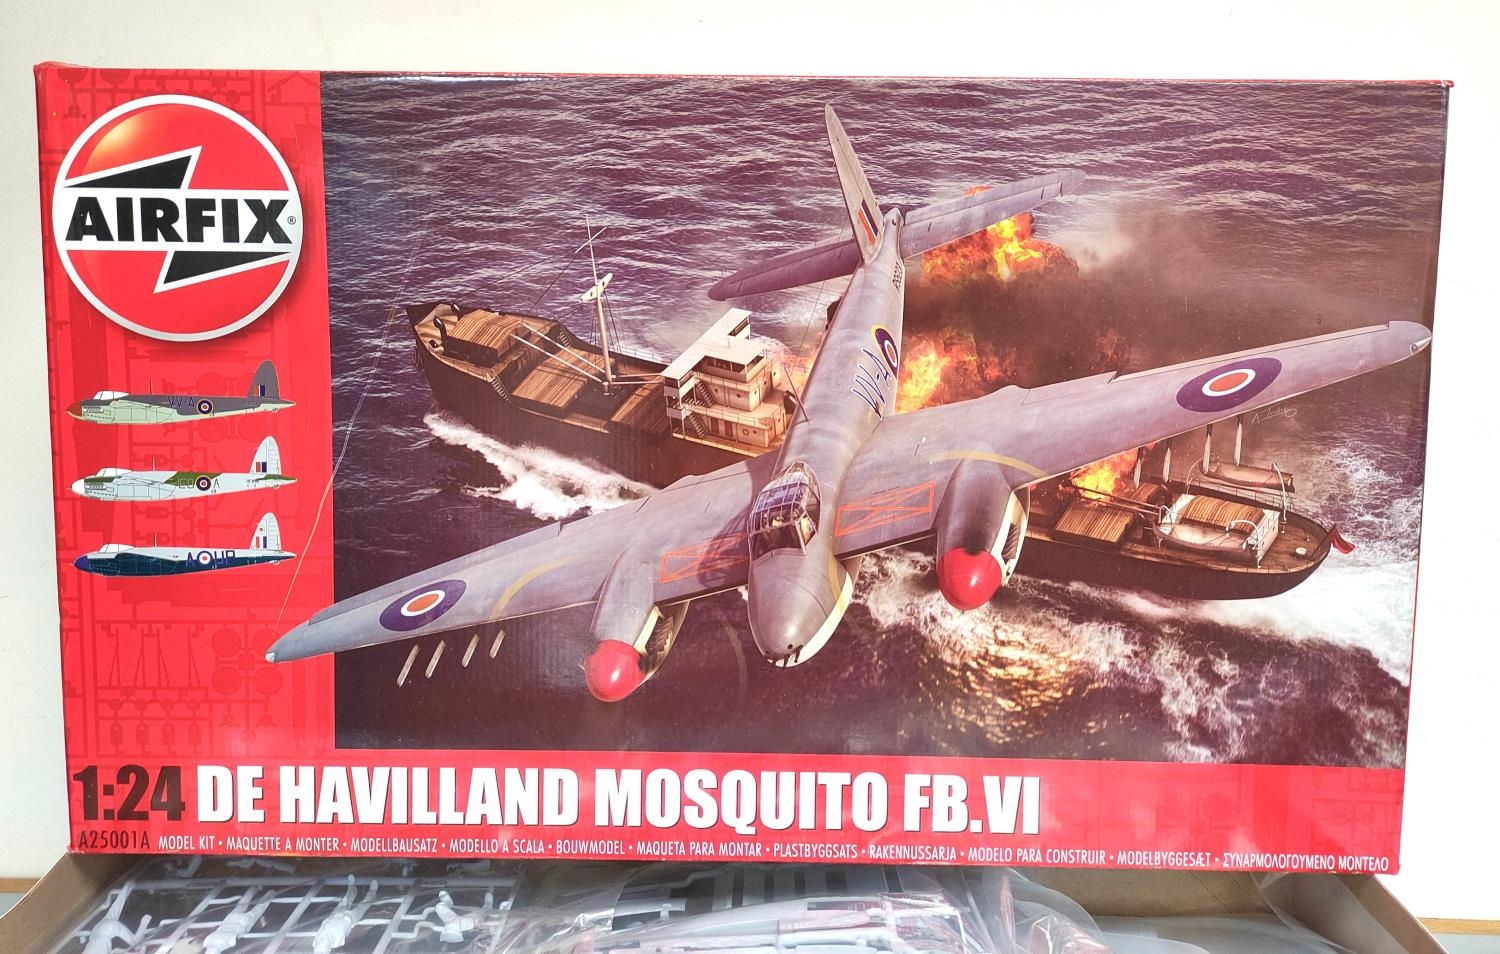 Airfix. Boxed 1:24 scale De Havilland Mosquito FB.VI model. Kit no. A25001A. Complete and components - Image 2 of 6